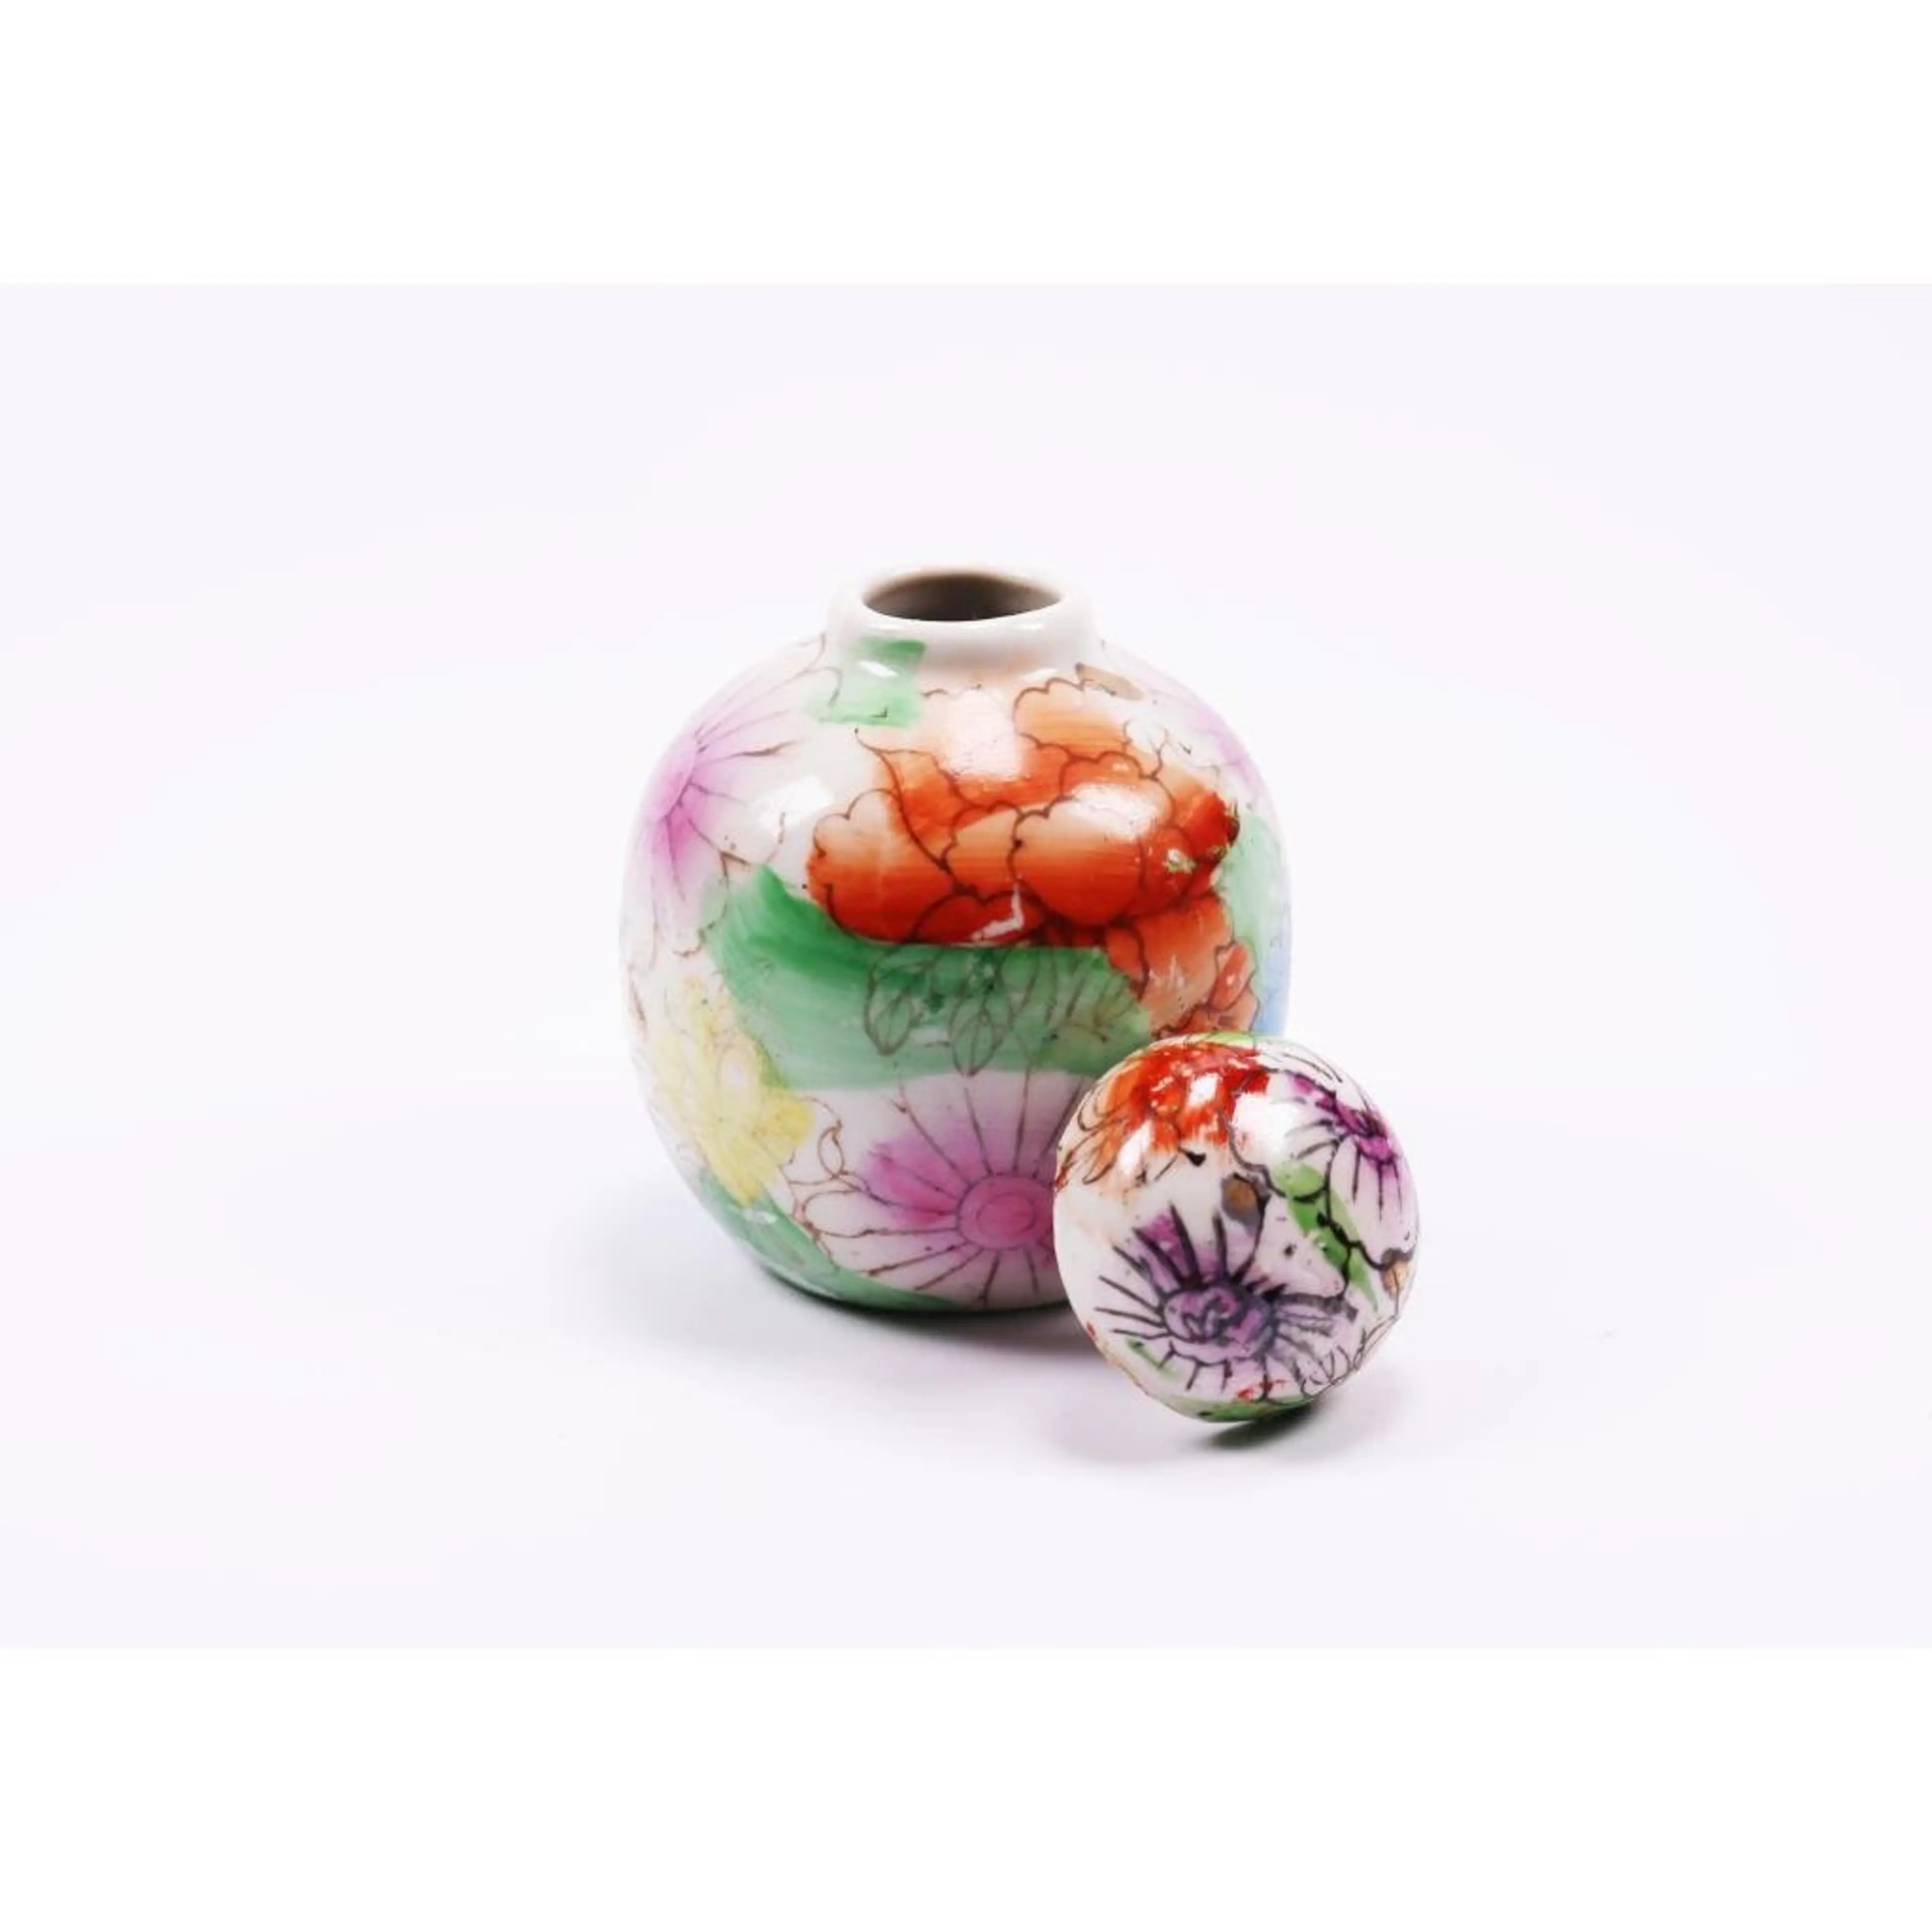 Vintage Chinese Porcelain Hand-Painted Ginger Jar With Floral Decoration